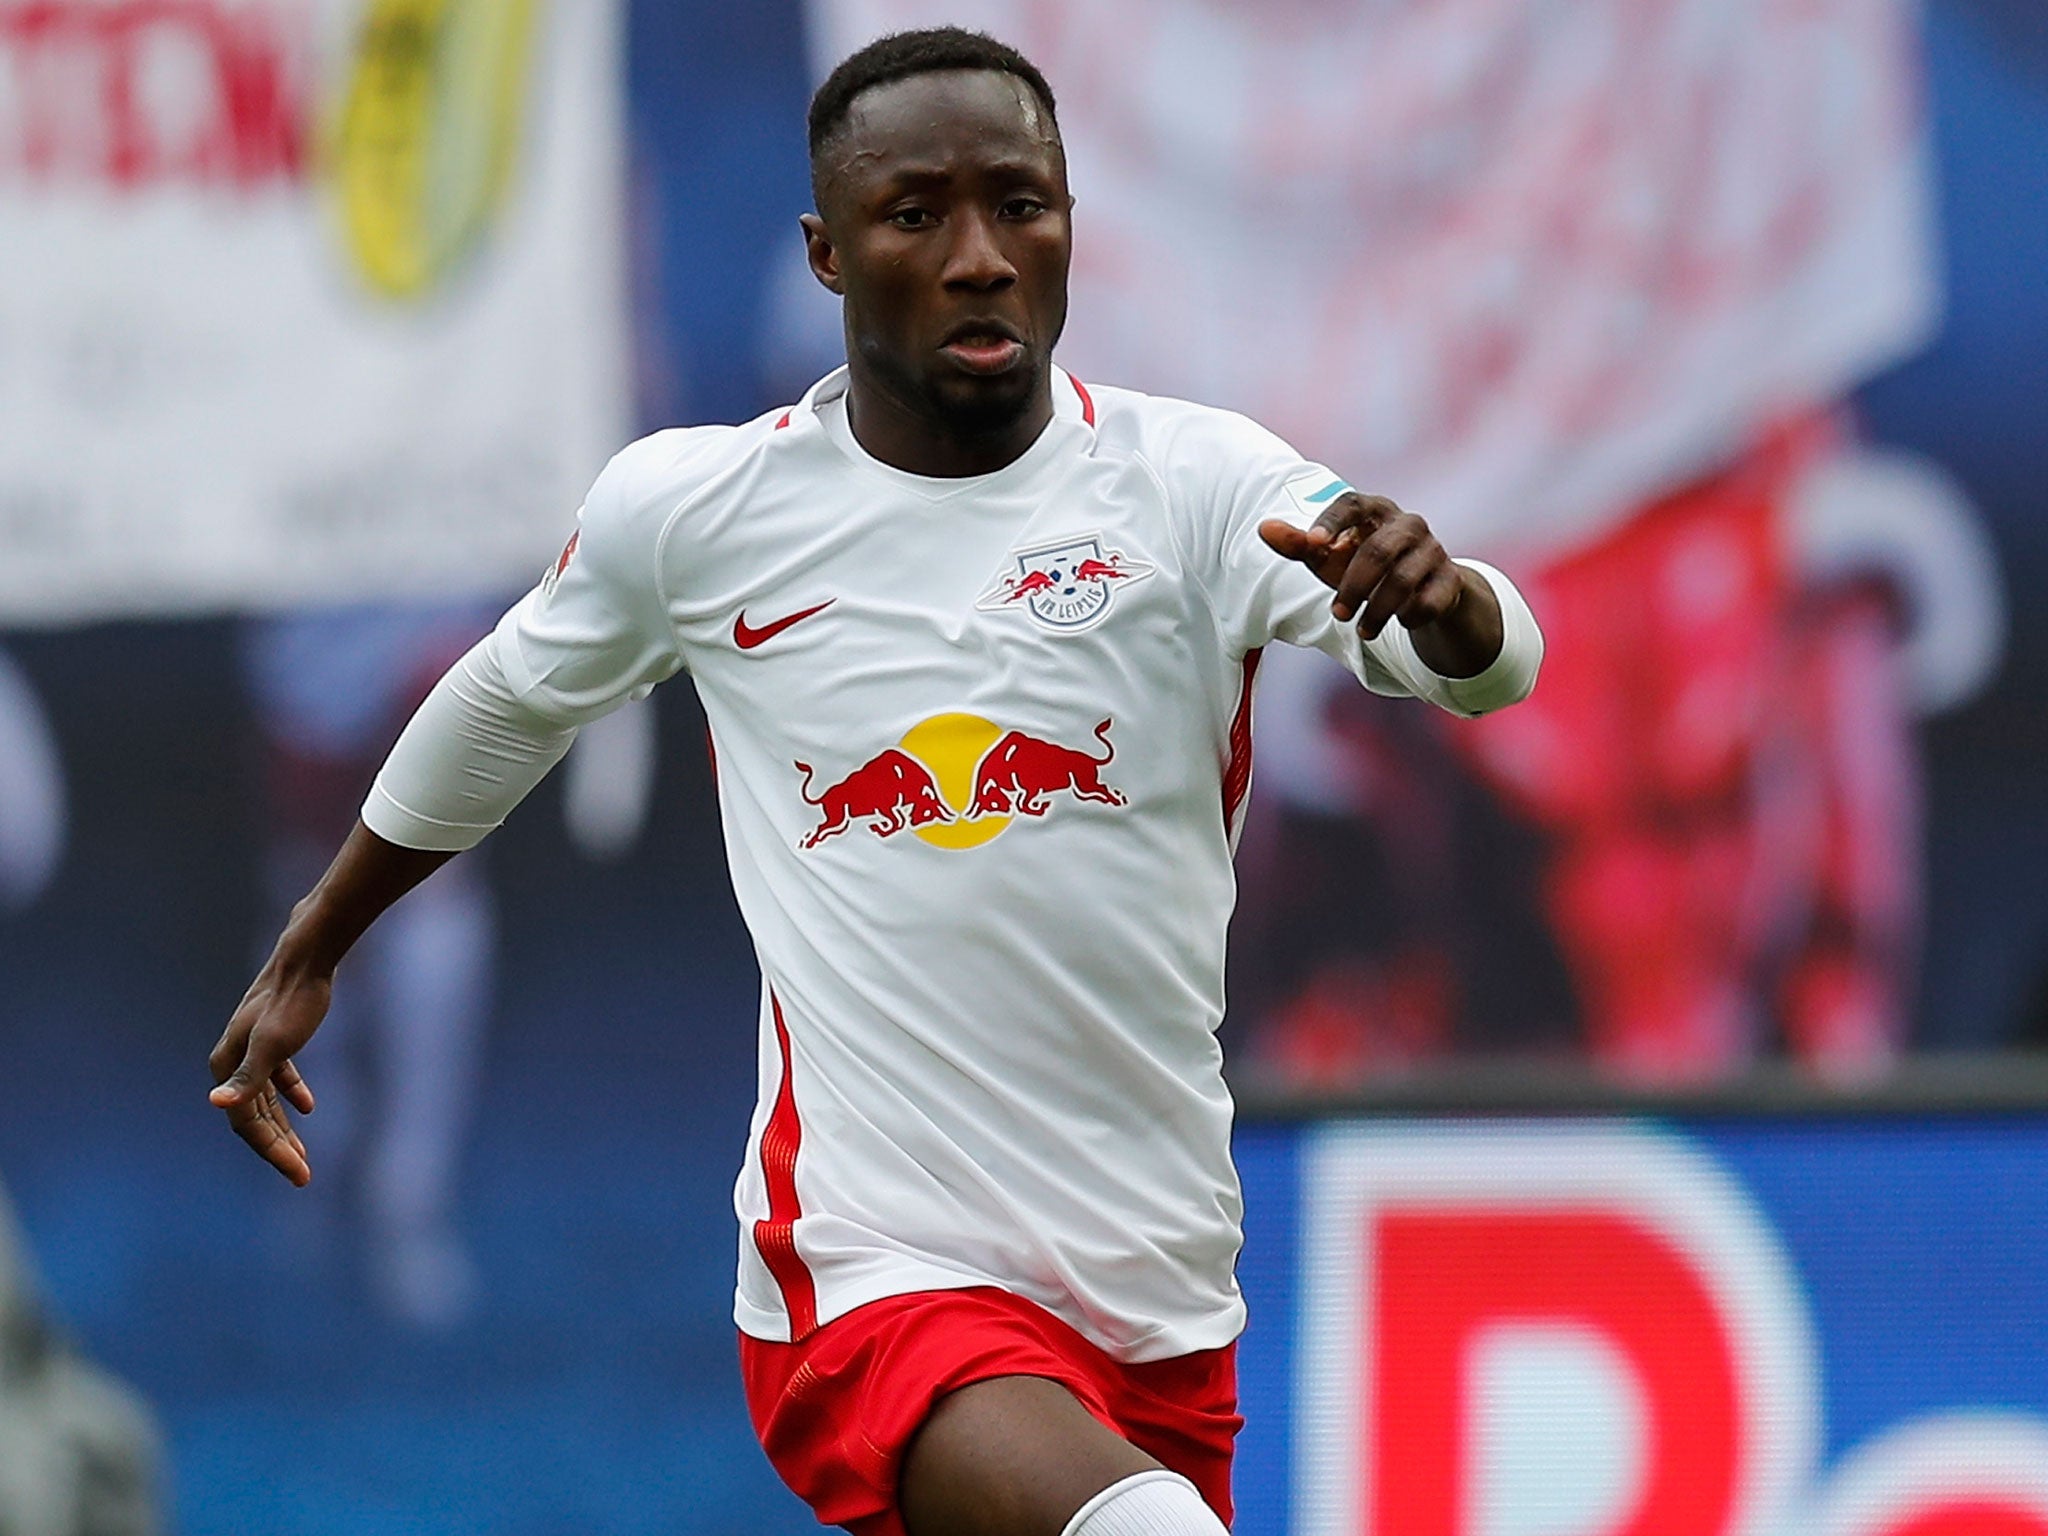 Naby Keita will be one of the star attractions at the Emirates Cup